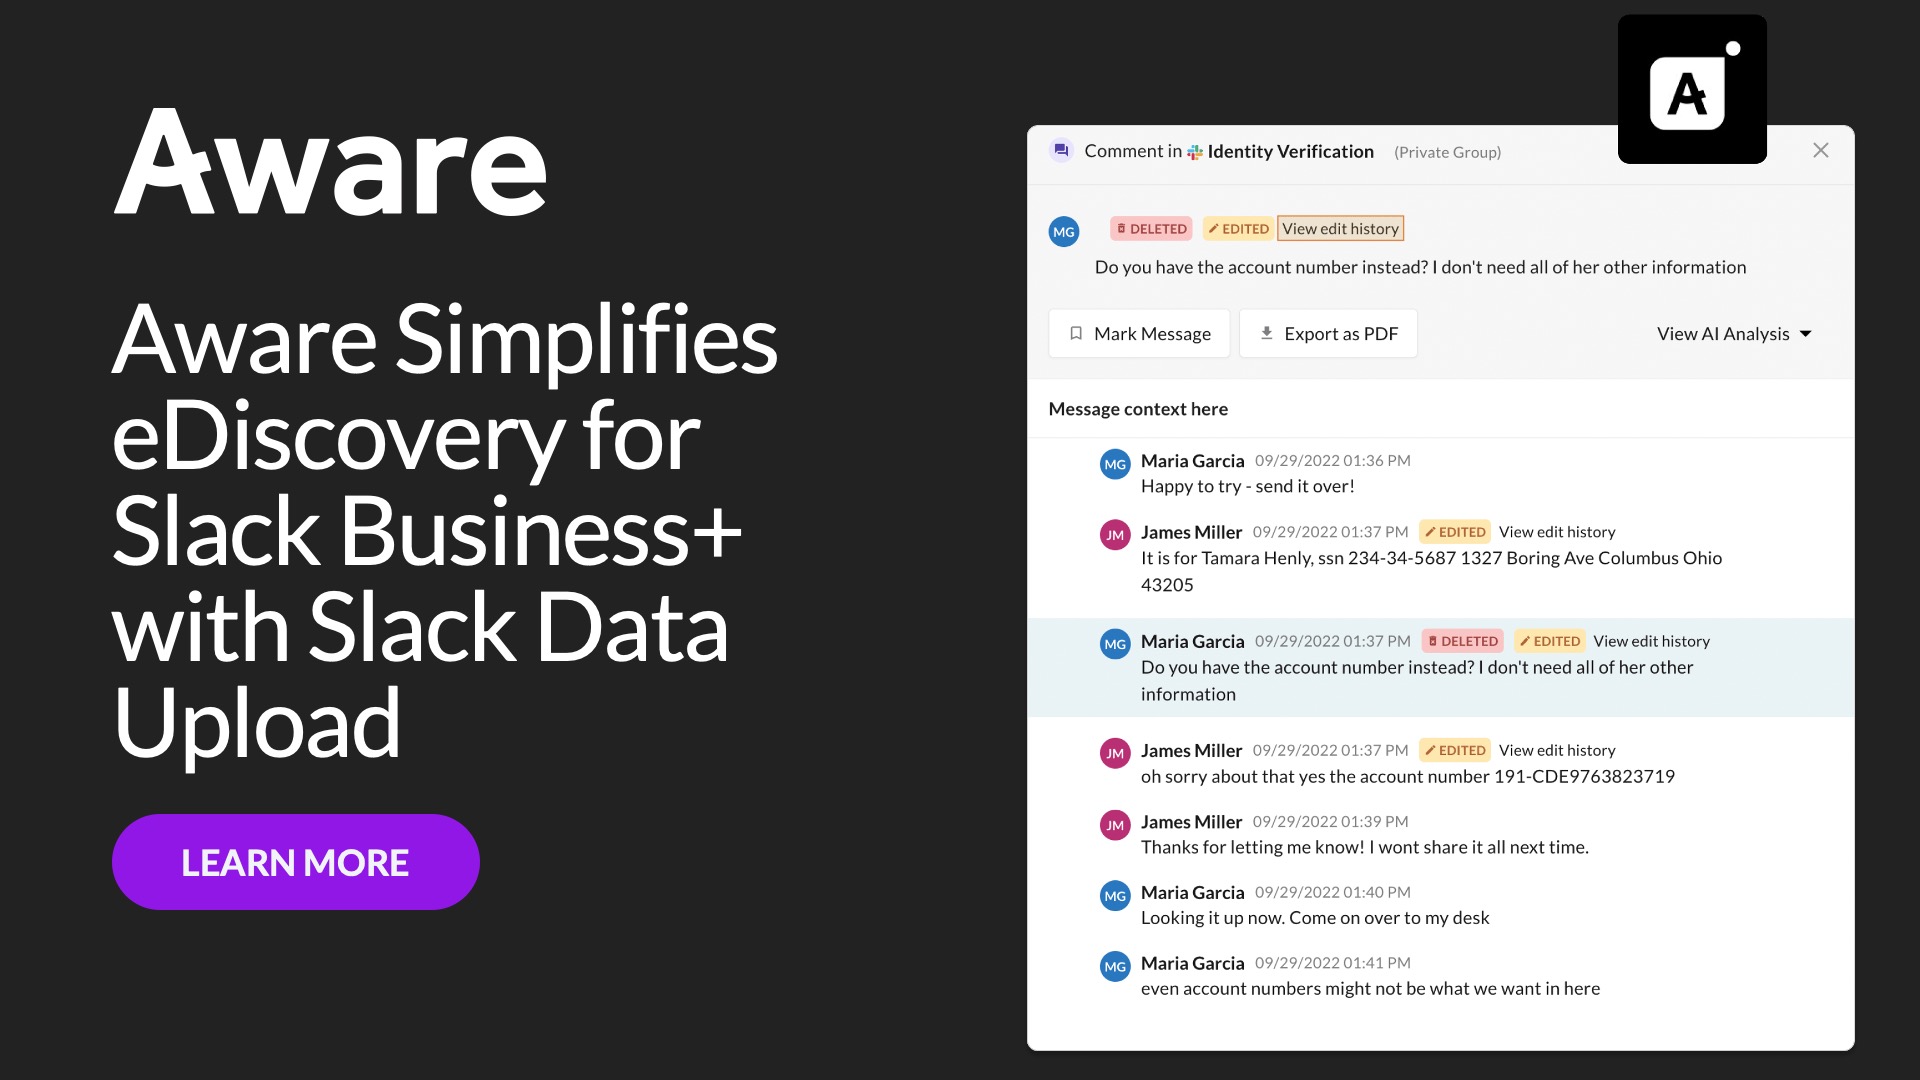 Aware Simplifies eDiscovery for Slack Business Plus with Slack Data Upload